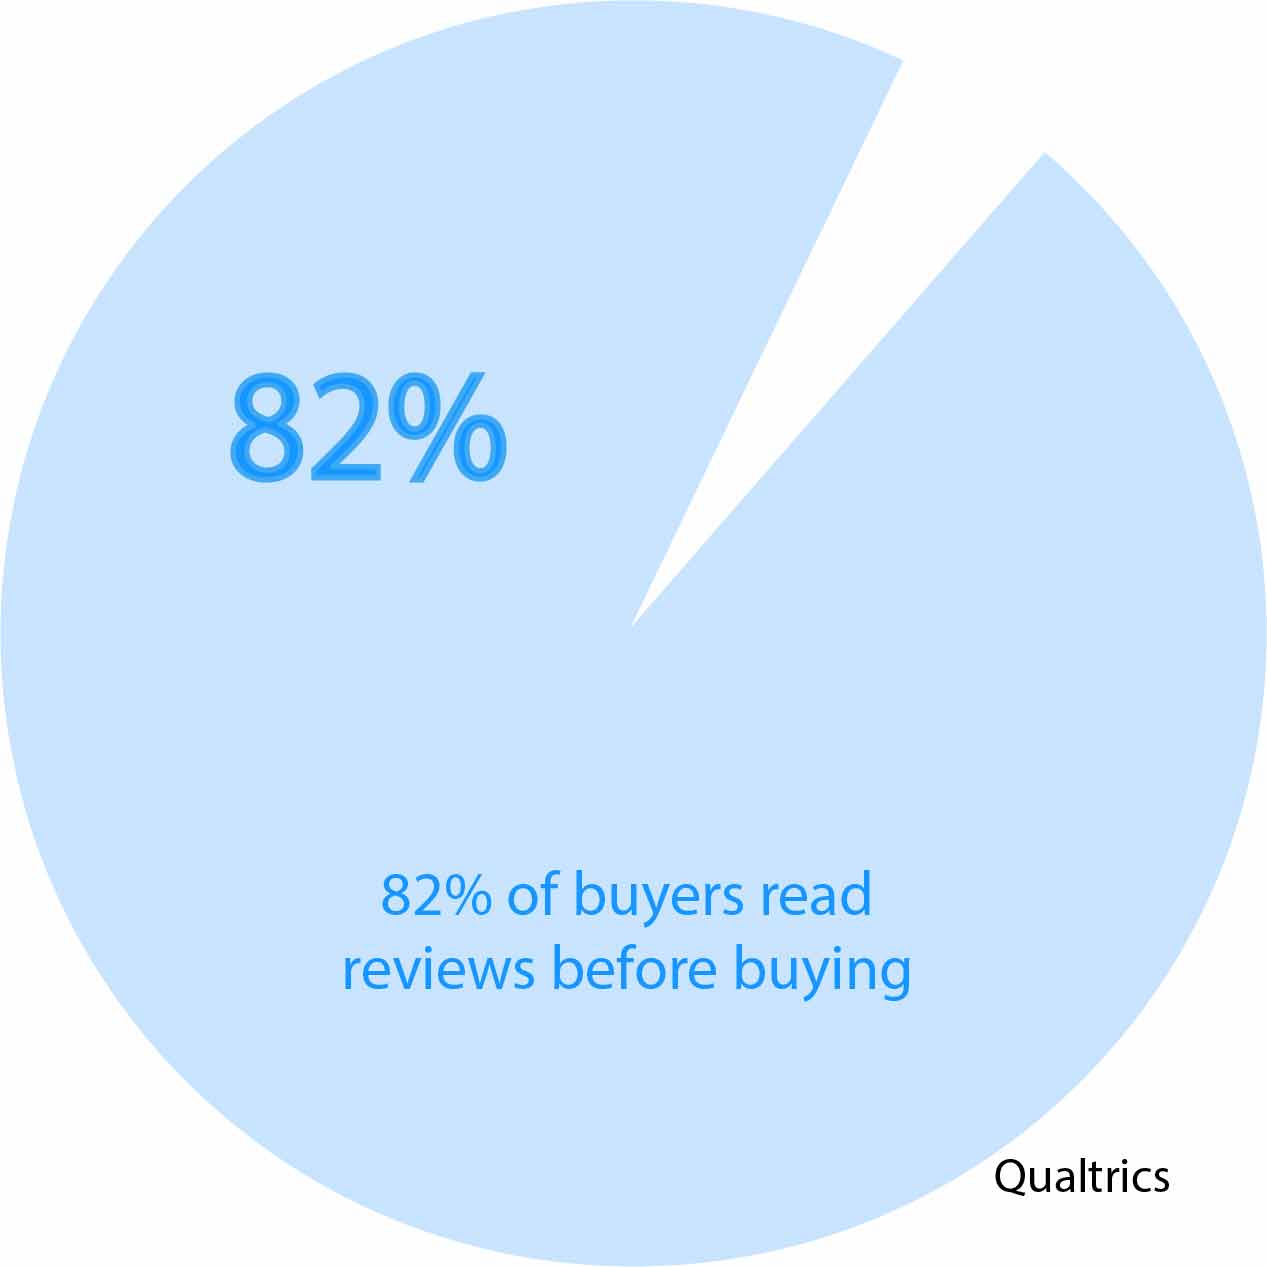 82% of customers read reviews before buying